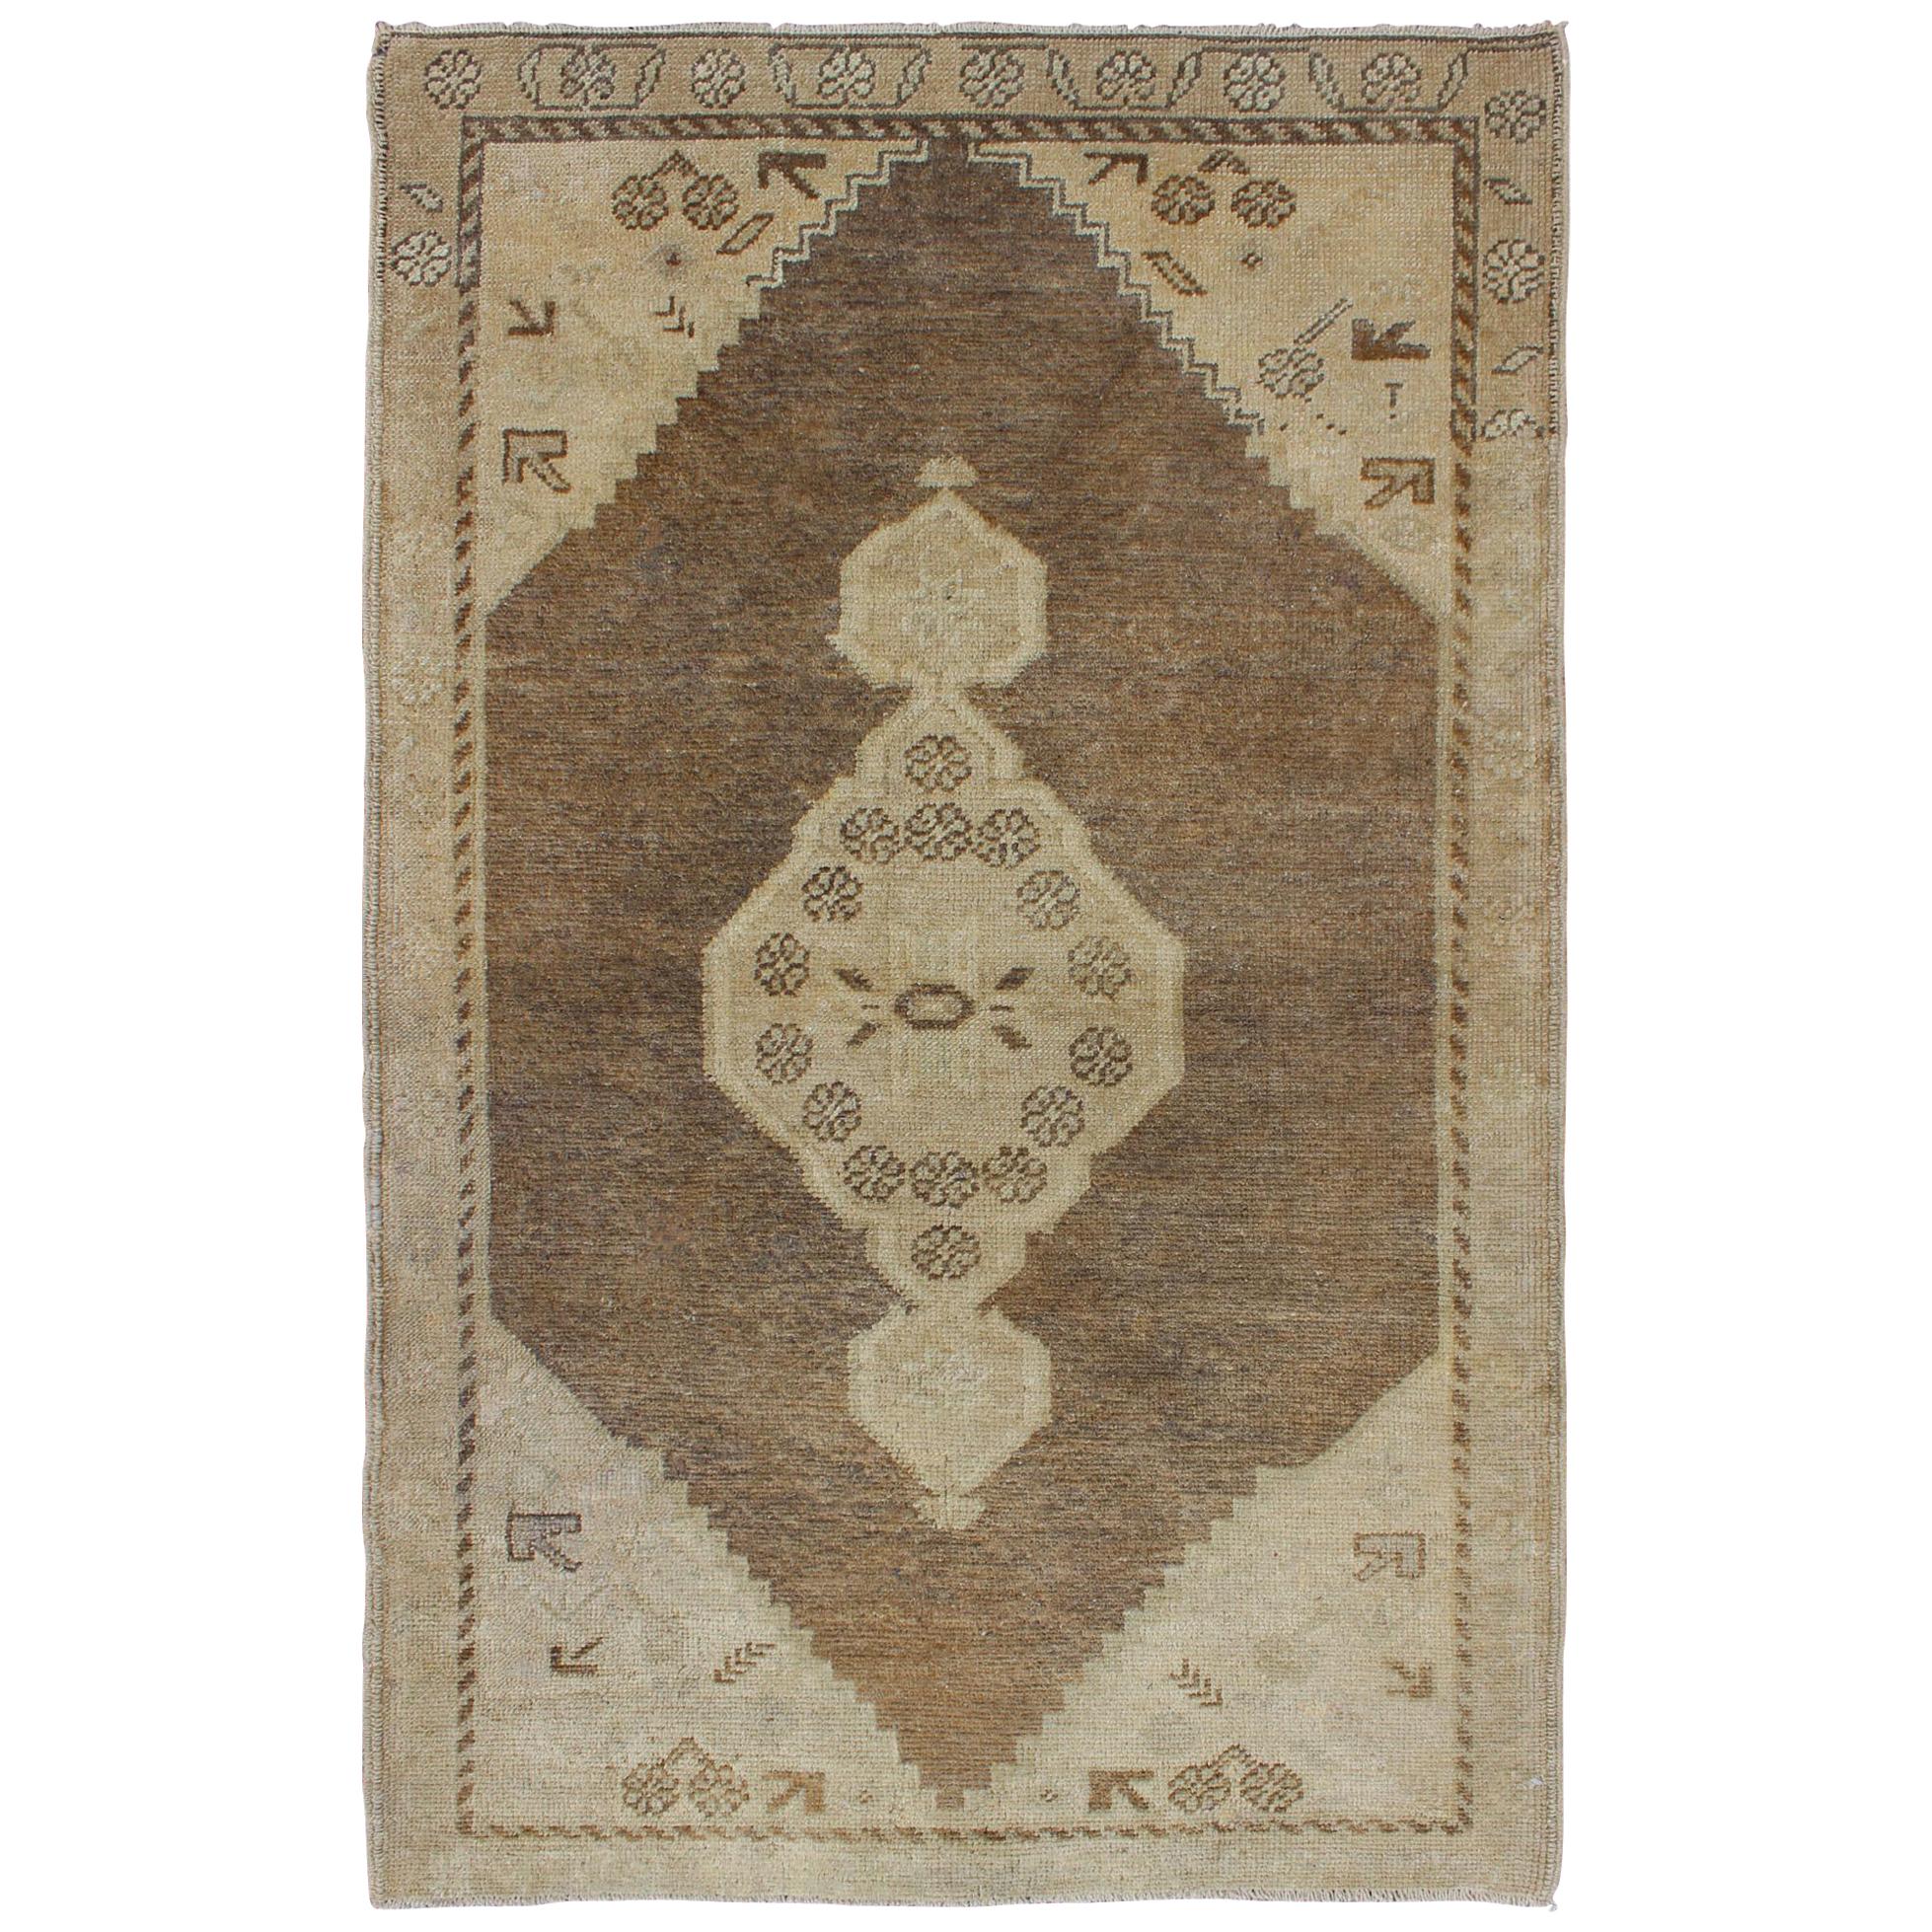 Midcentury Turkish Oushak Rug with Medallion and Cornices in Brown and Taupe